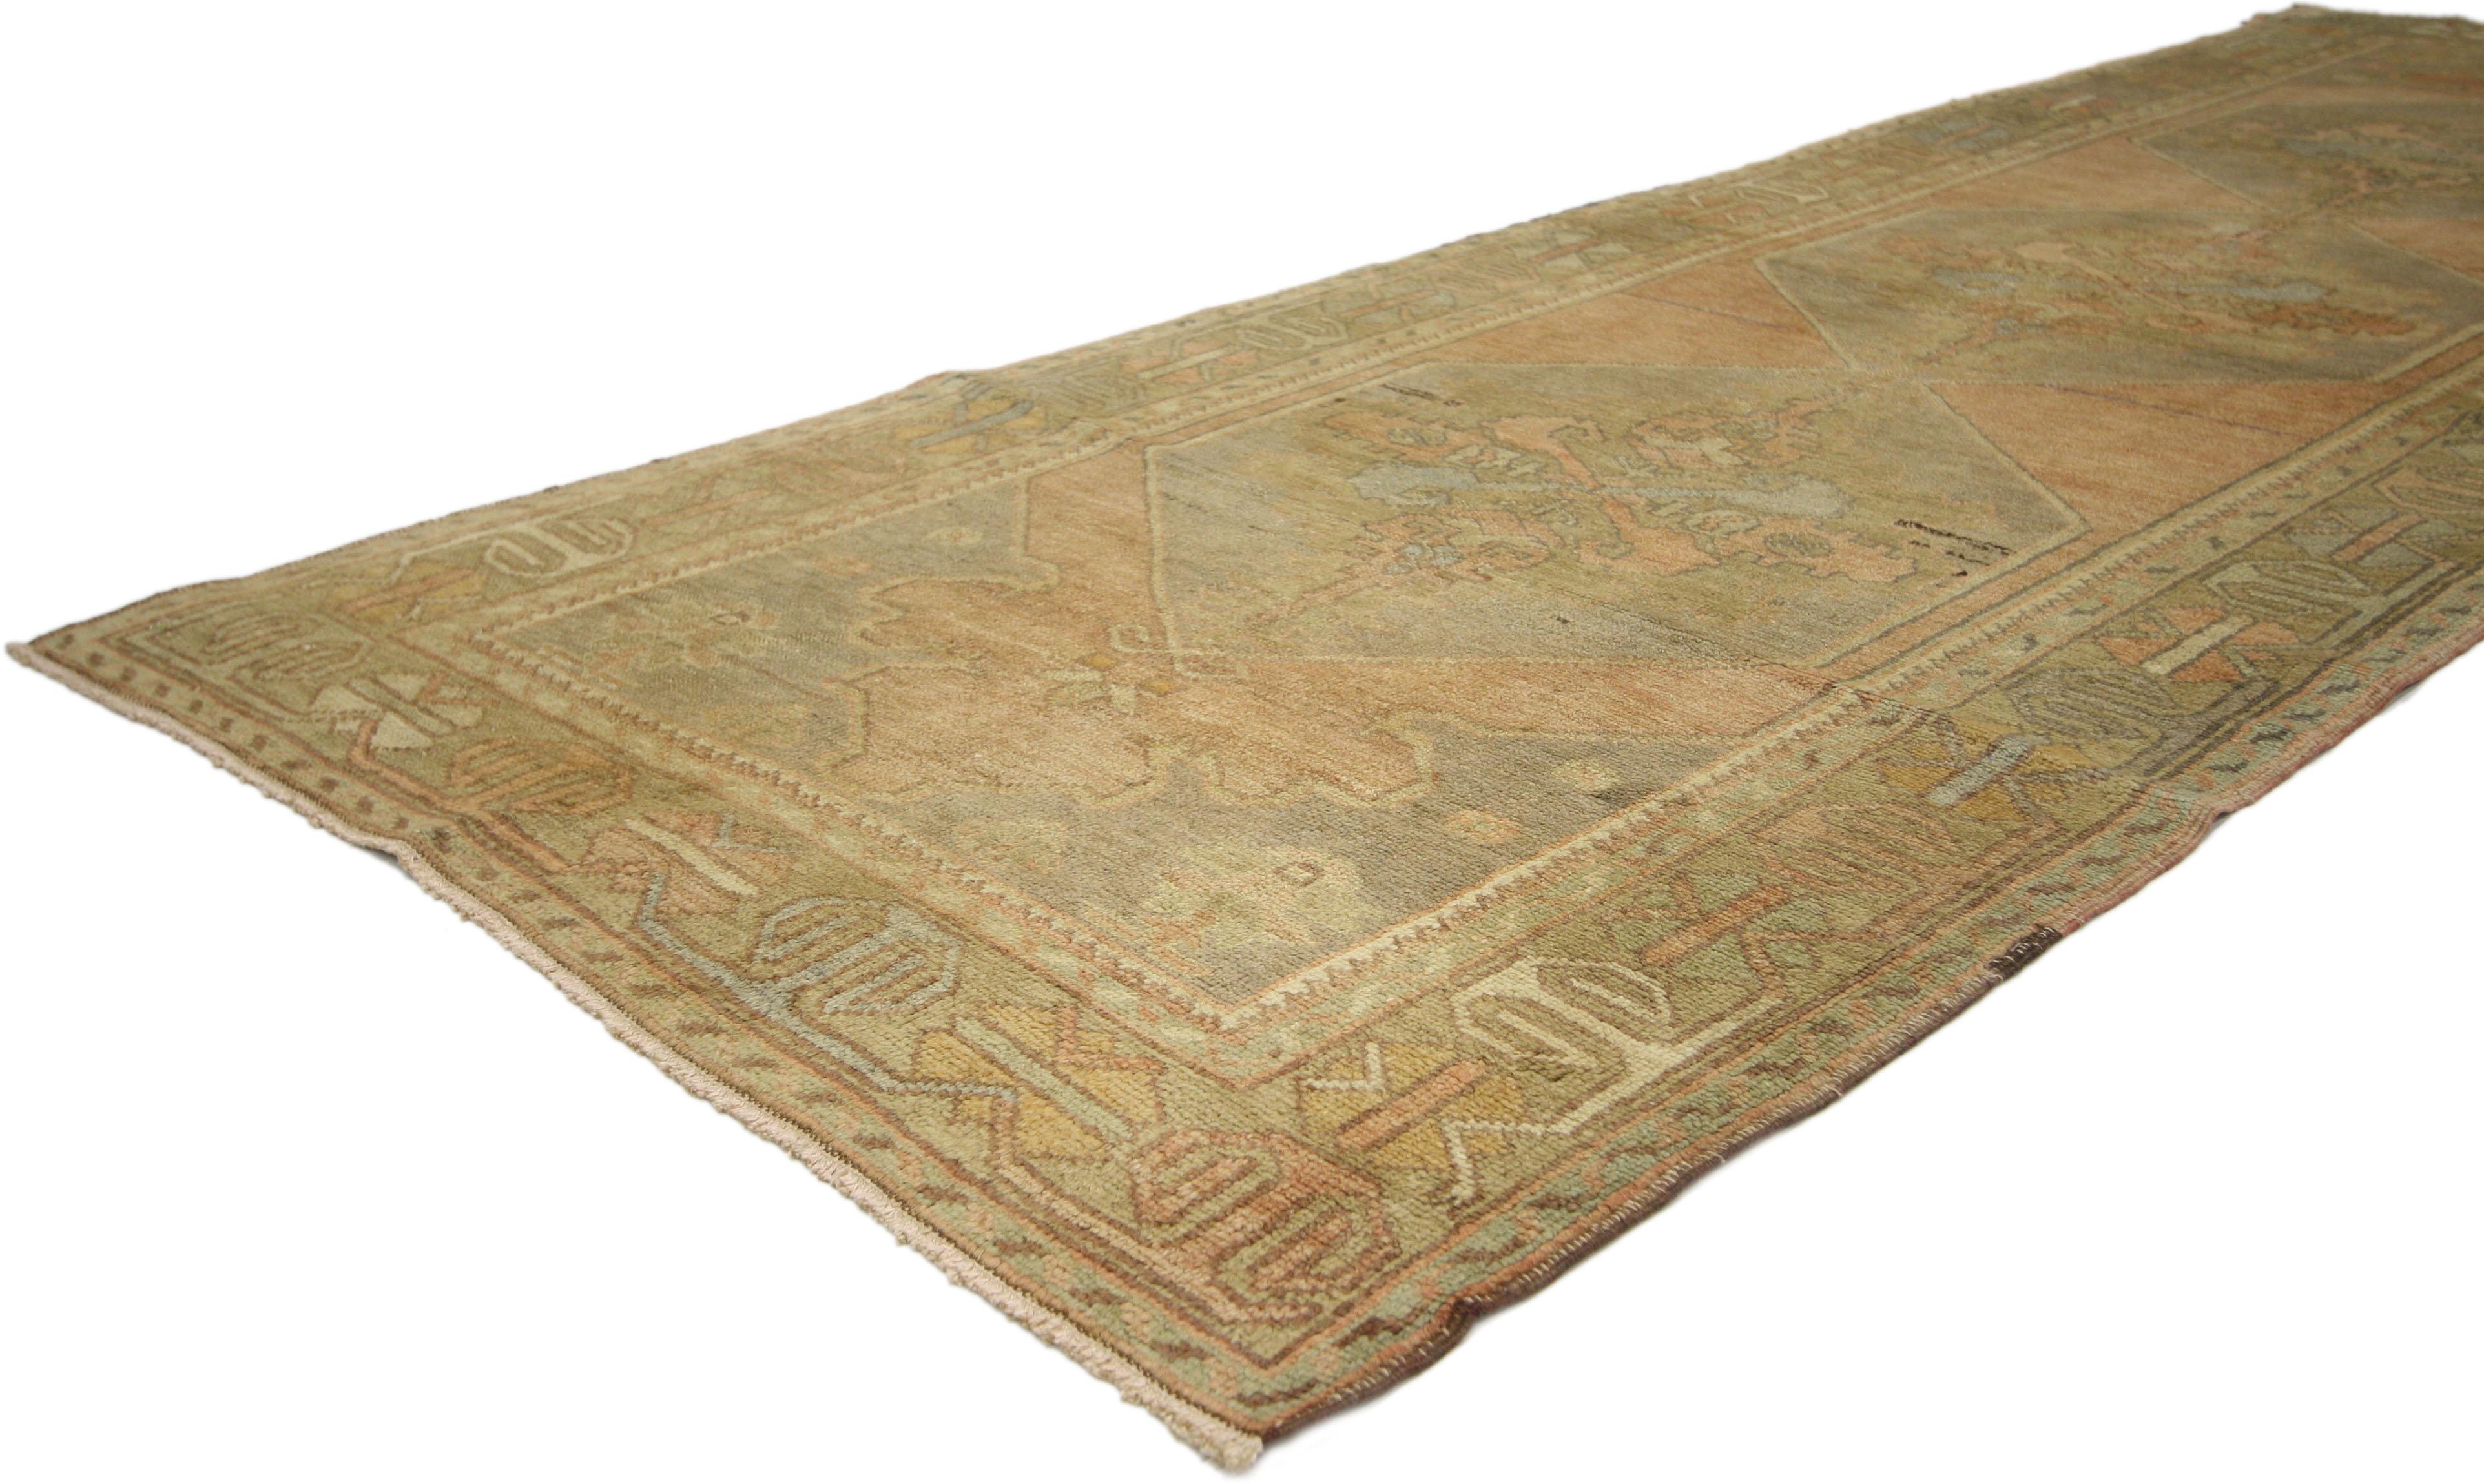 Vintage Turkish Oushak Runner with Modern Rustic Artisan Style, Hallway Runner In Good Condition For Sale In Dallas, TX